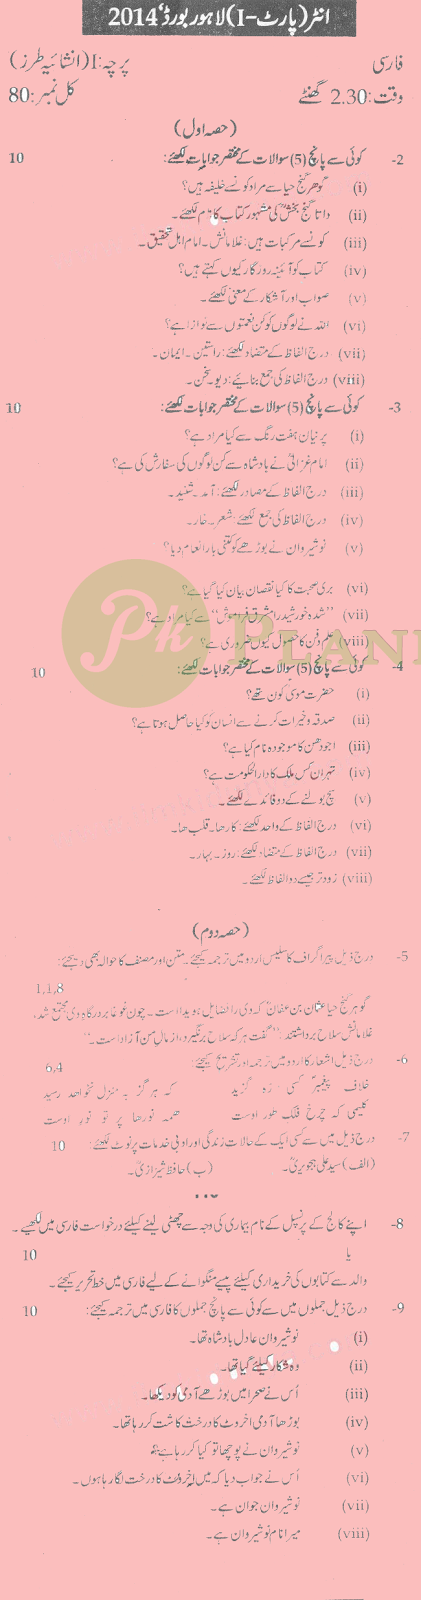 Past Papers of Persian Inter Part 1 Lahore Board 2014